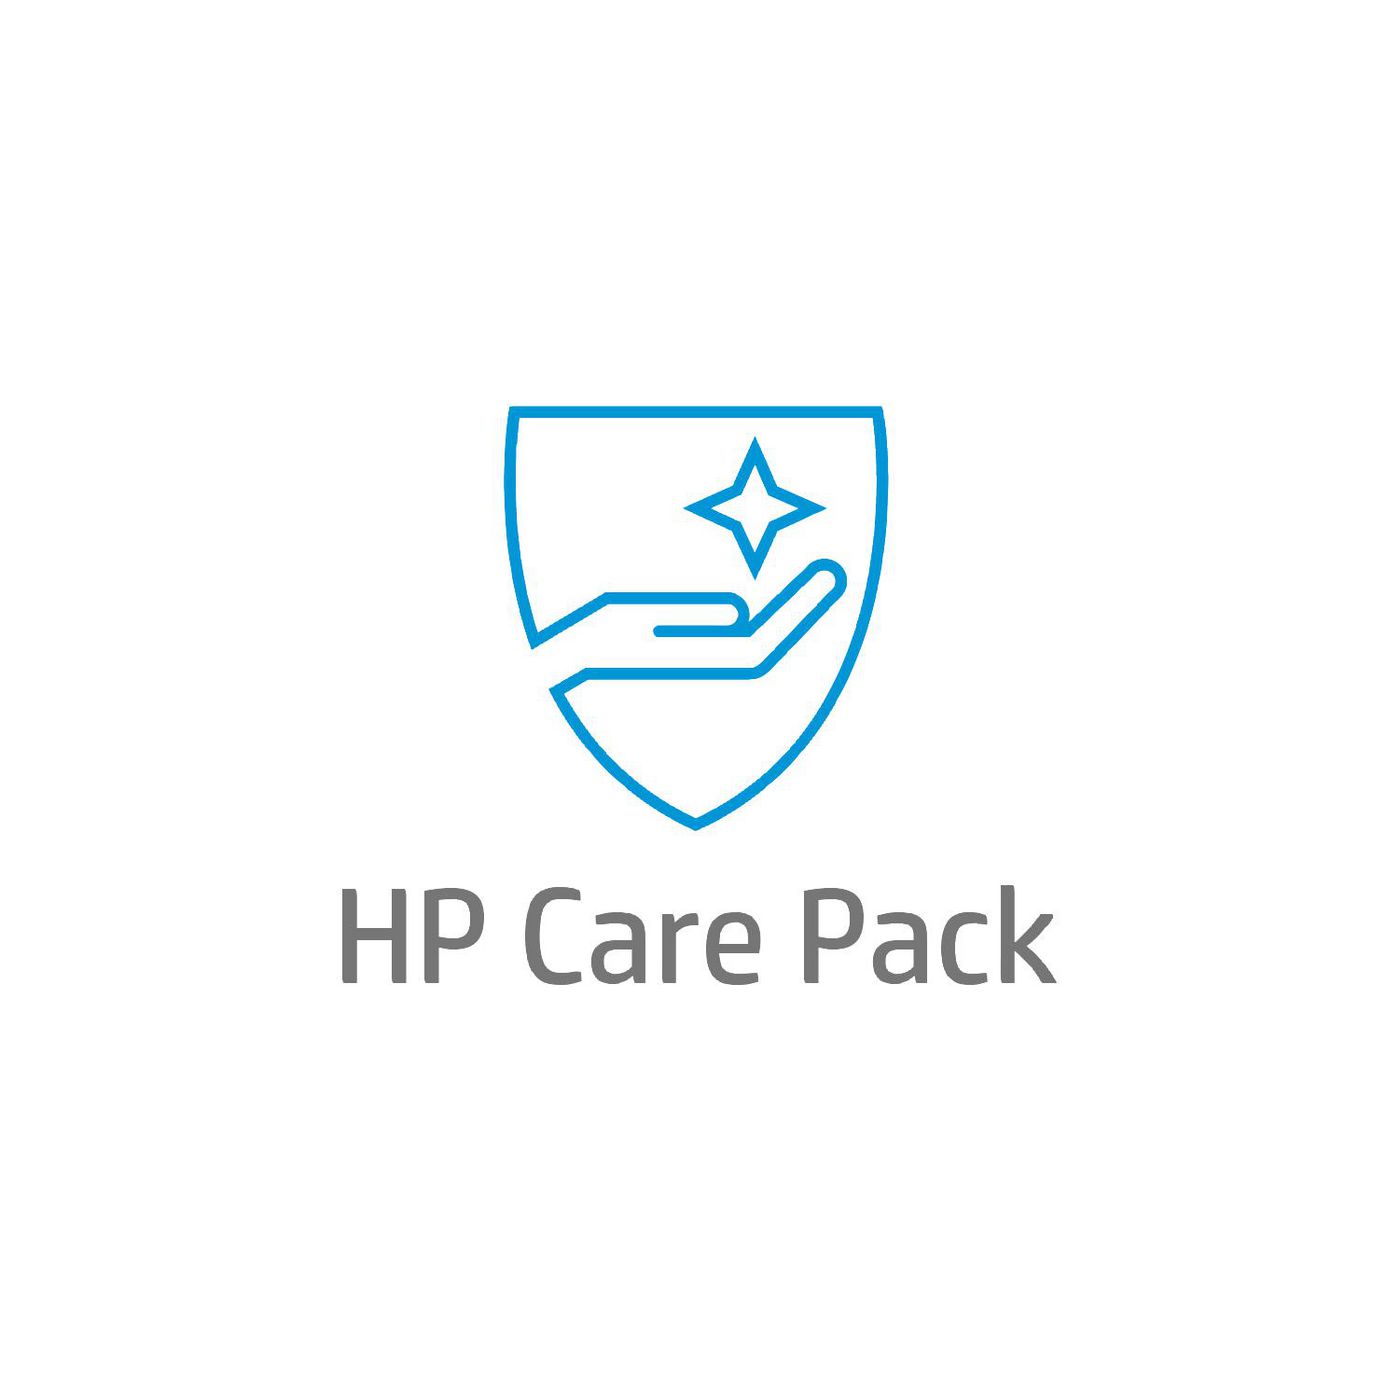 HP Care Pack Pick-Up and Return Service with Accidental Damage Protection - Serviceerweiterung - 2 J